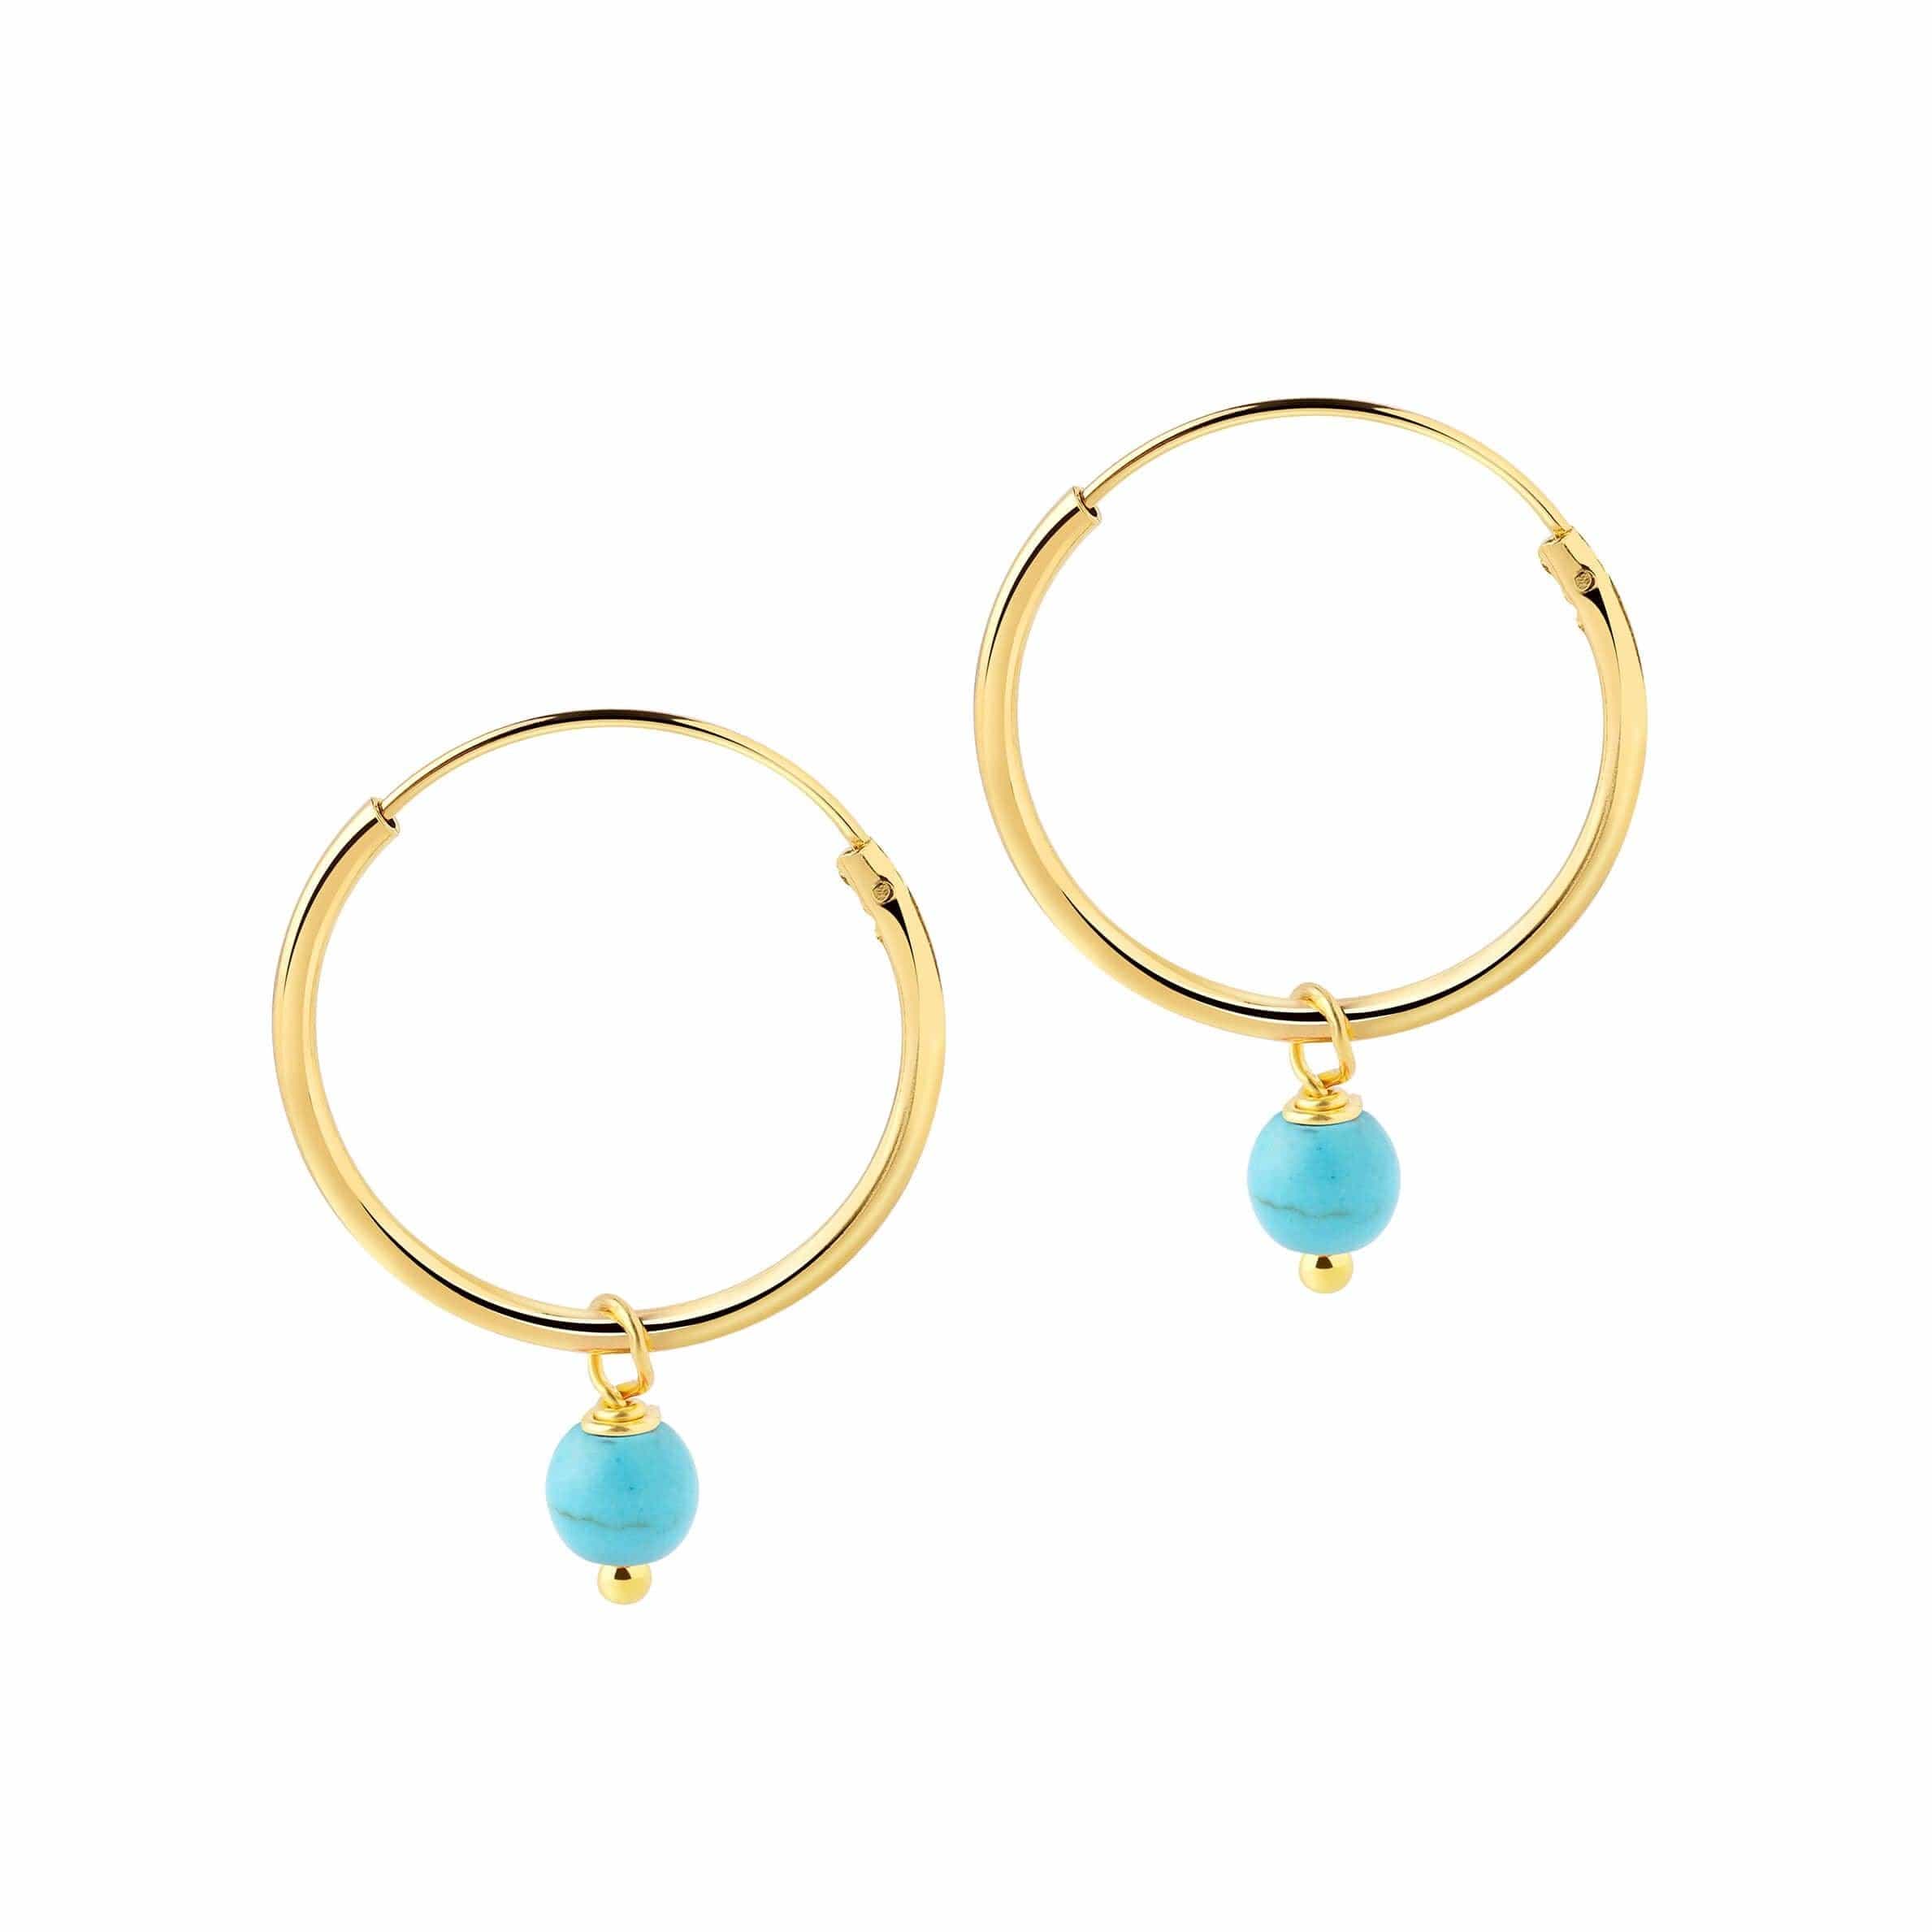 18mm gold plated Hoop Earrings Turquoise Blue Stone